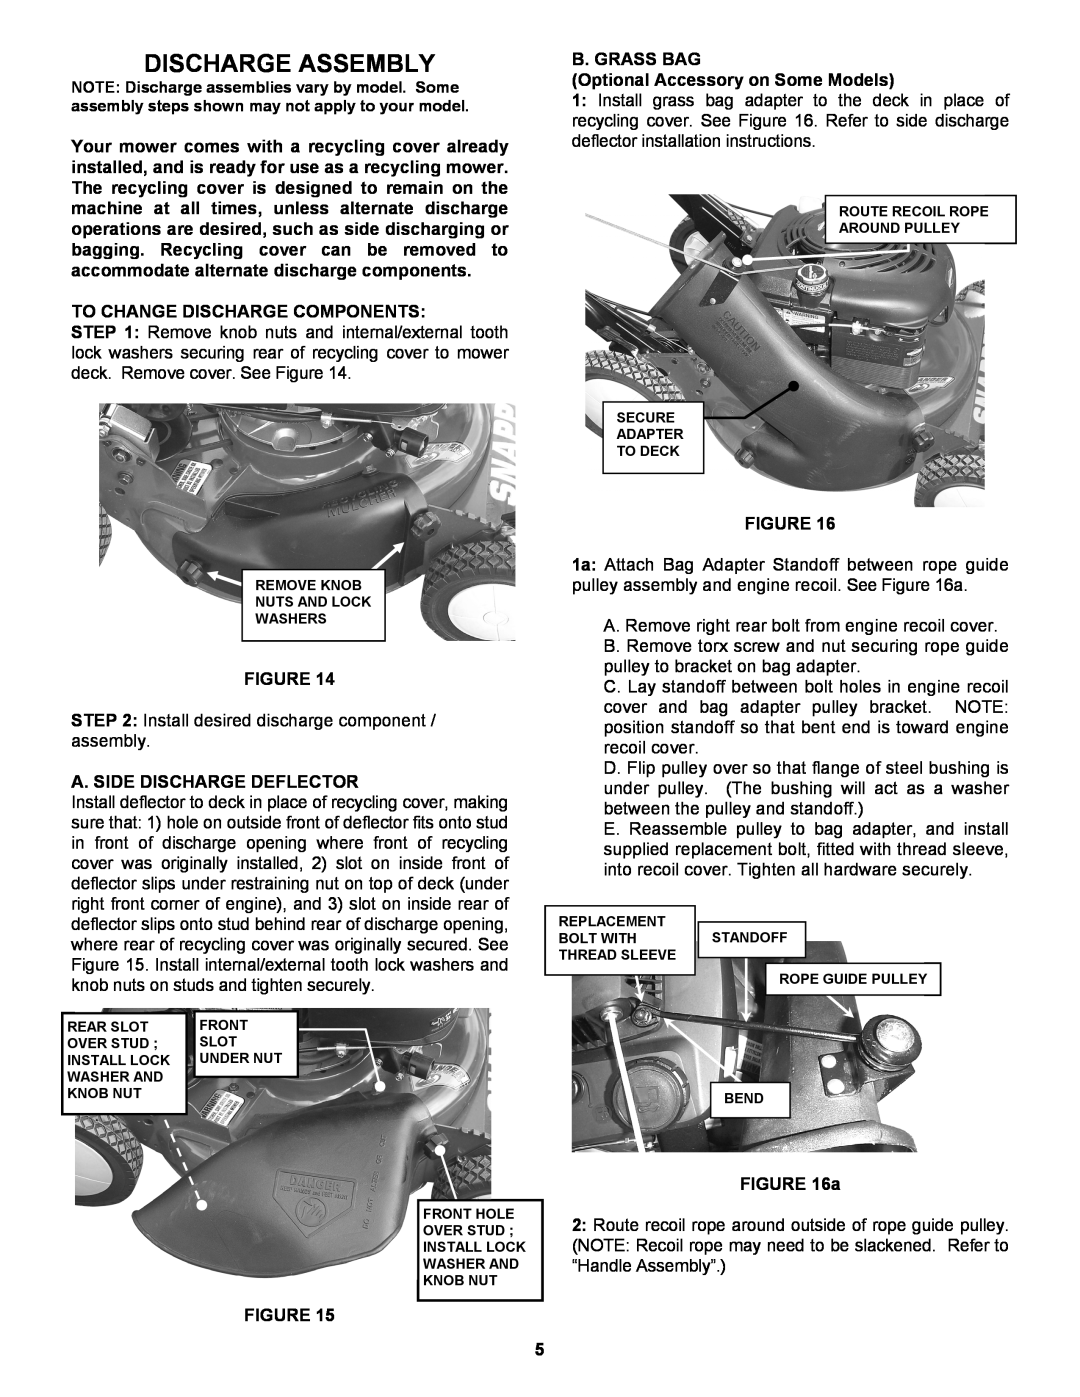 Snapper Lawn Mower manual Discharge Assembly, To Change Discharge Components, A. Side Discharge Deflector 